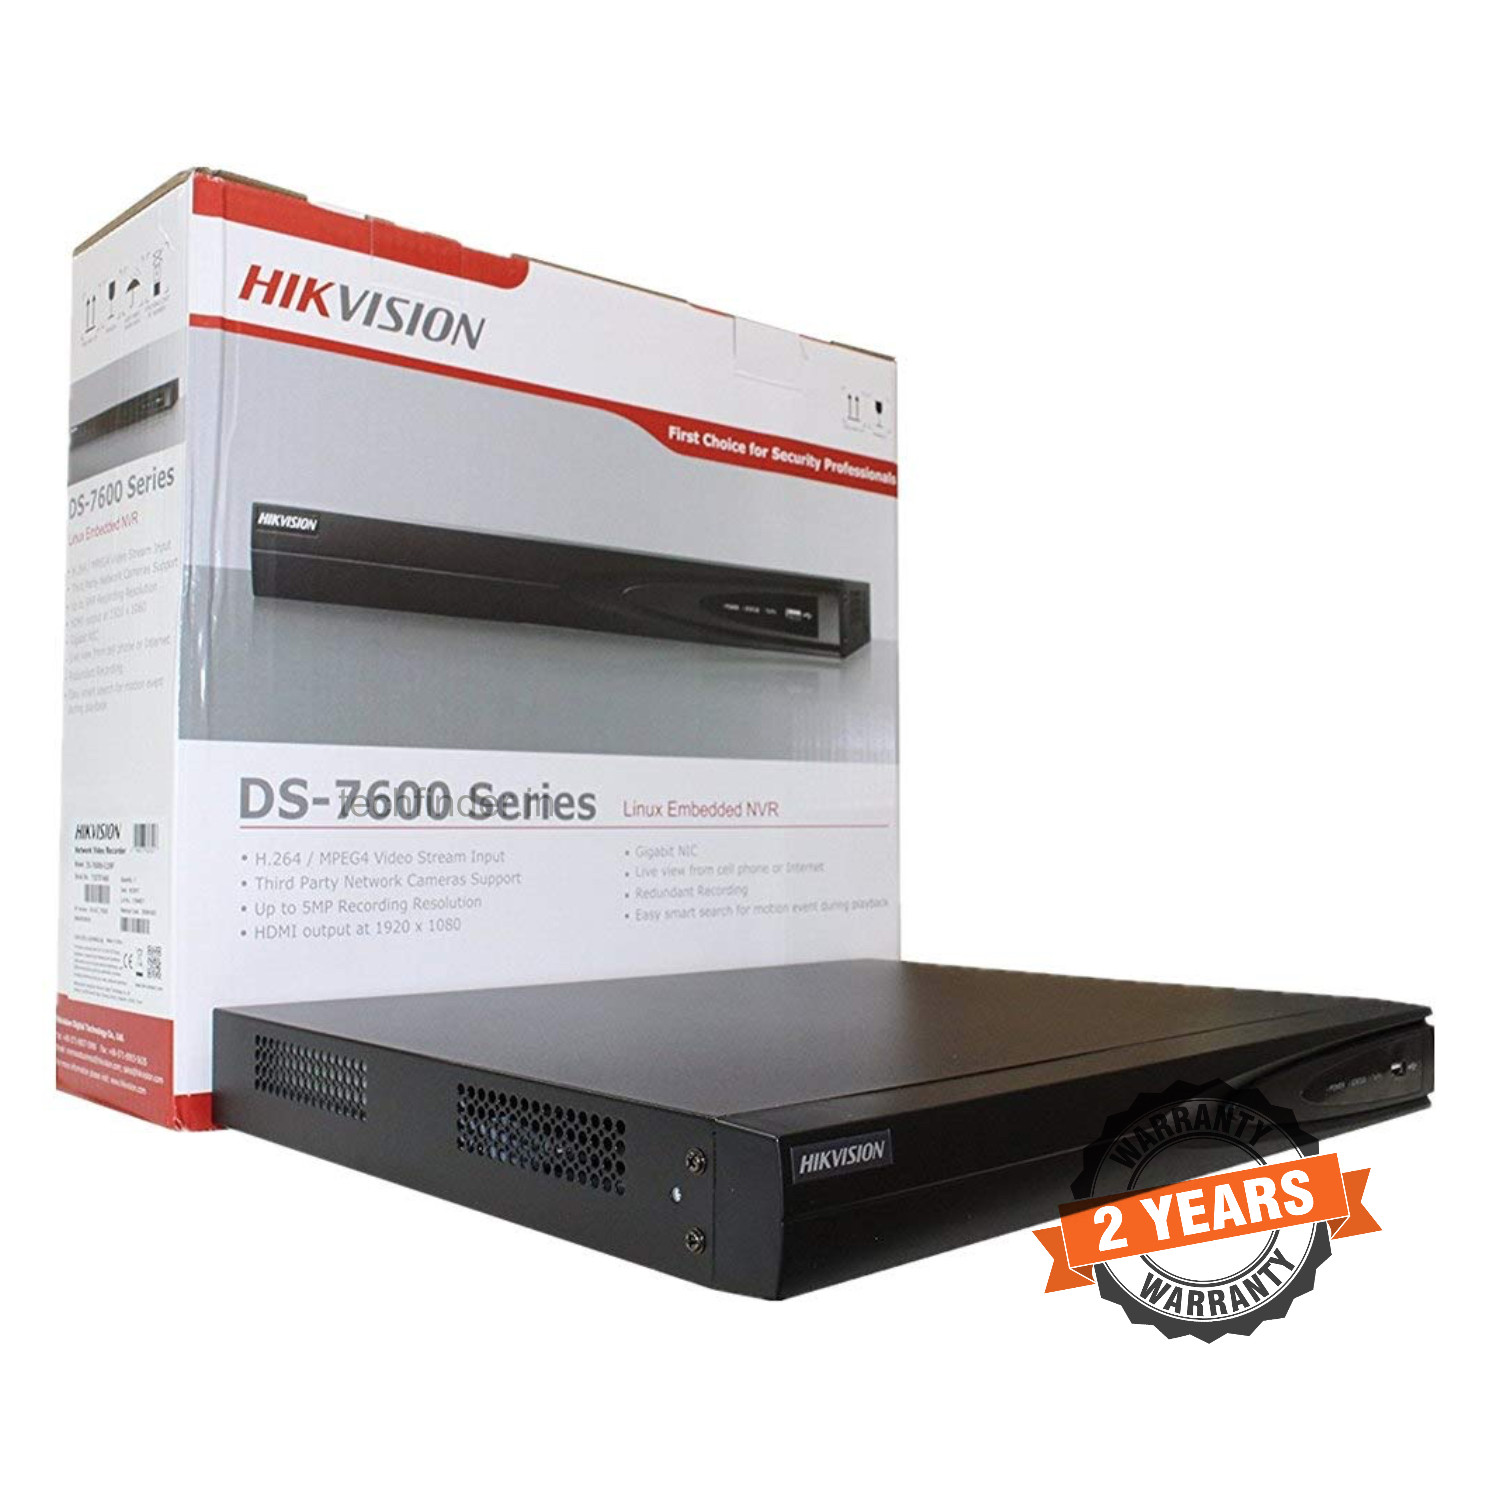 Hikvision DS-7608NI-Q1 Series 8ch 4k Nvr